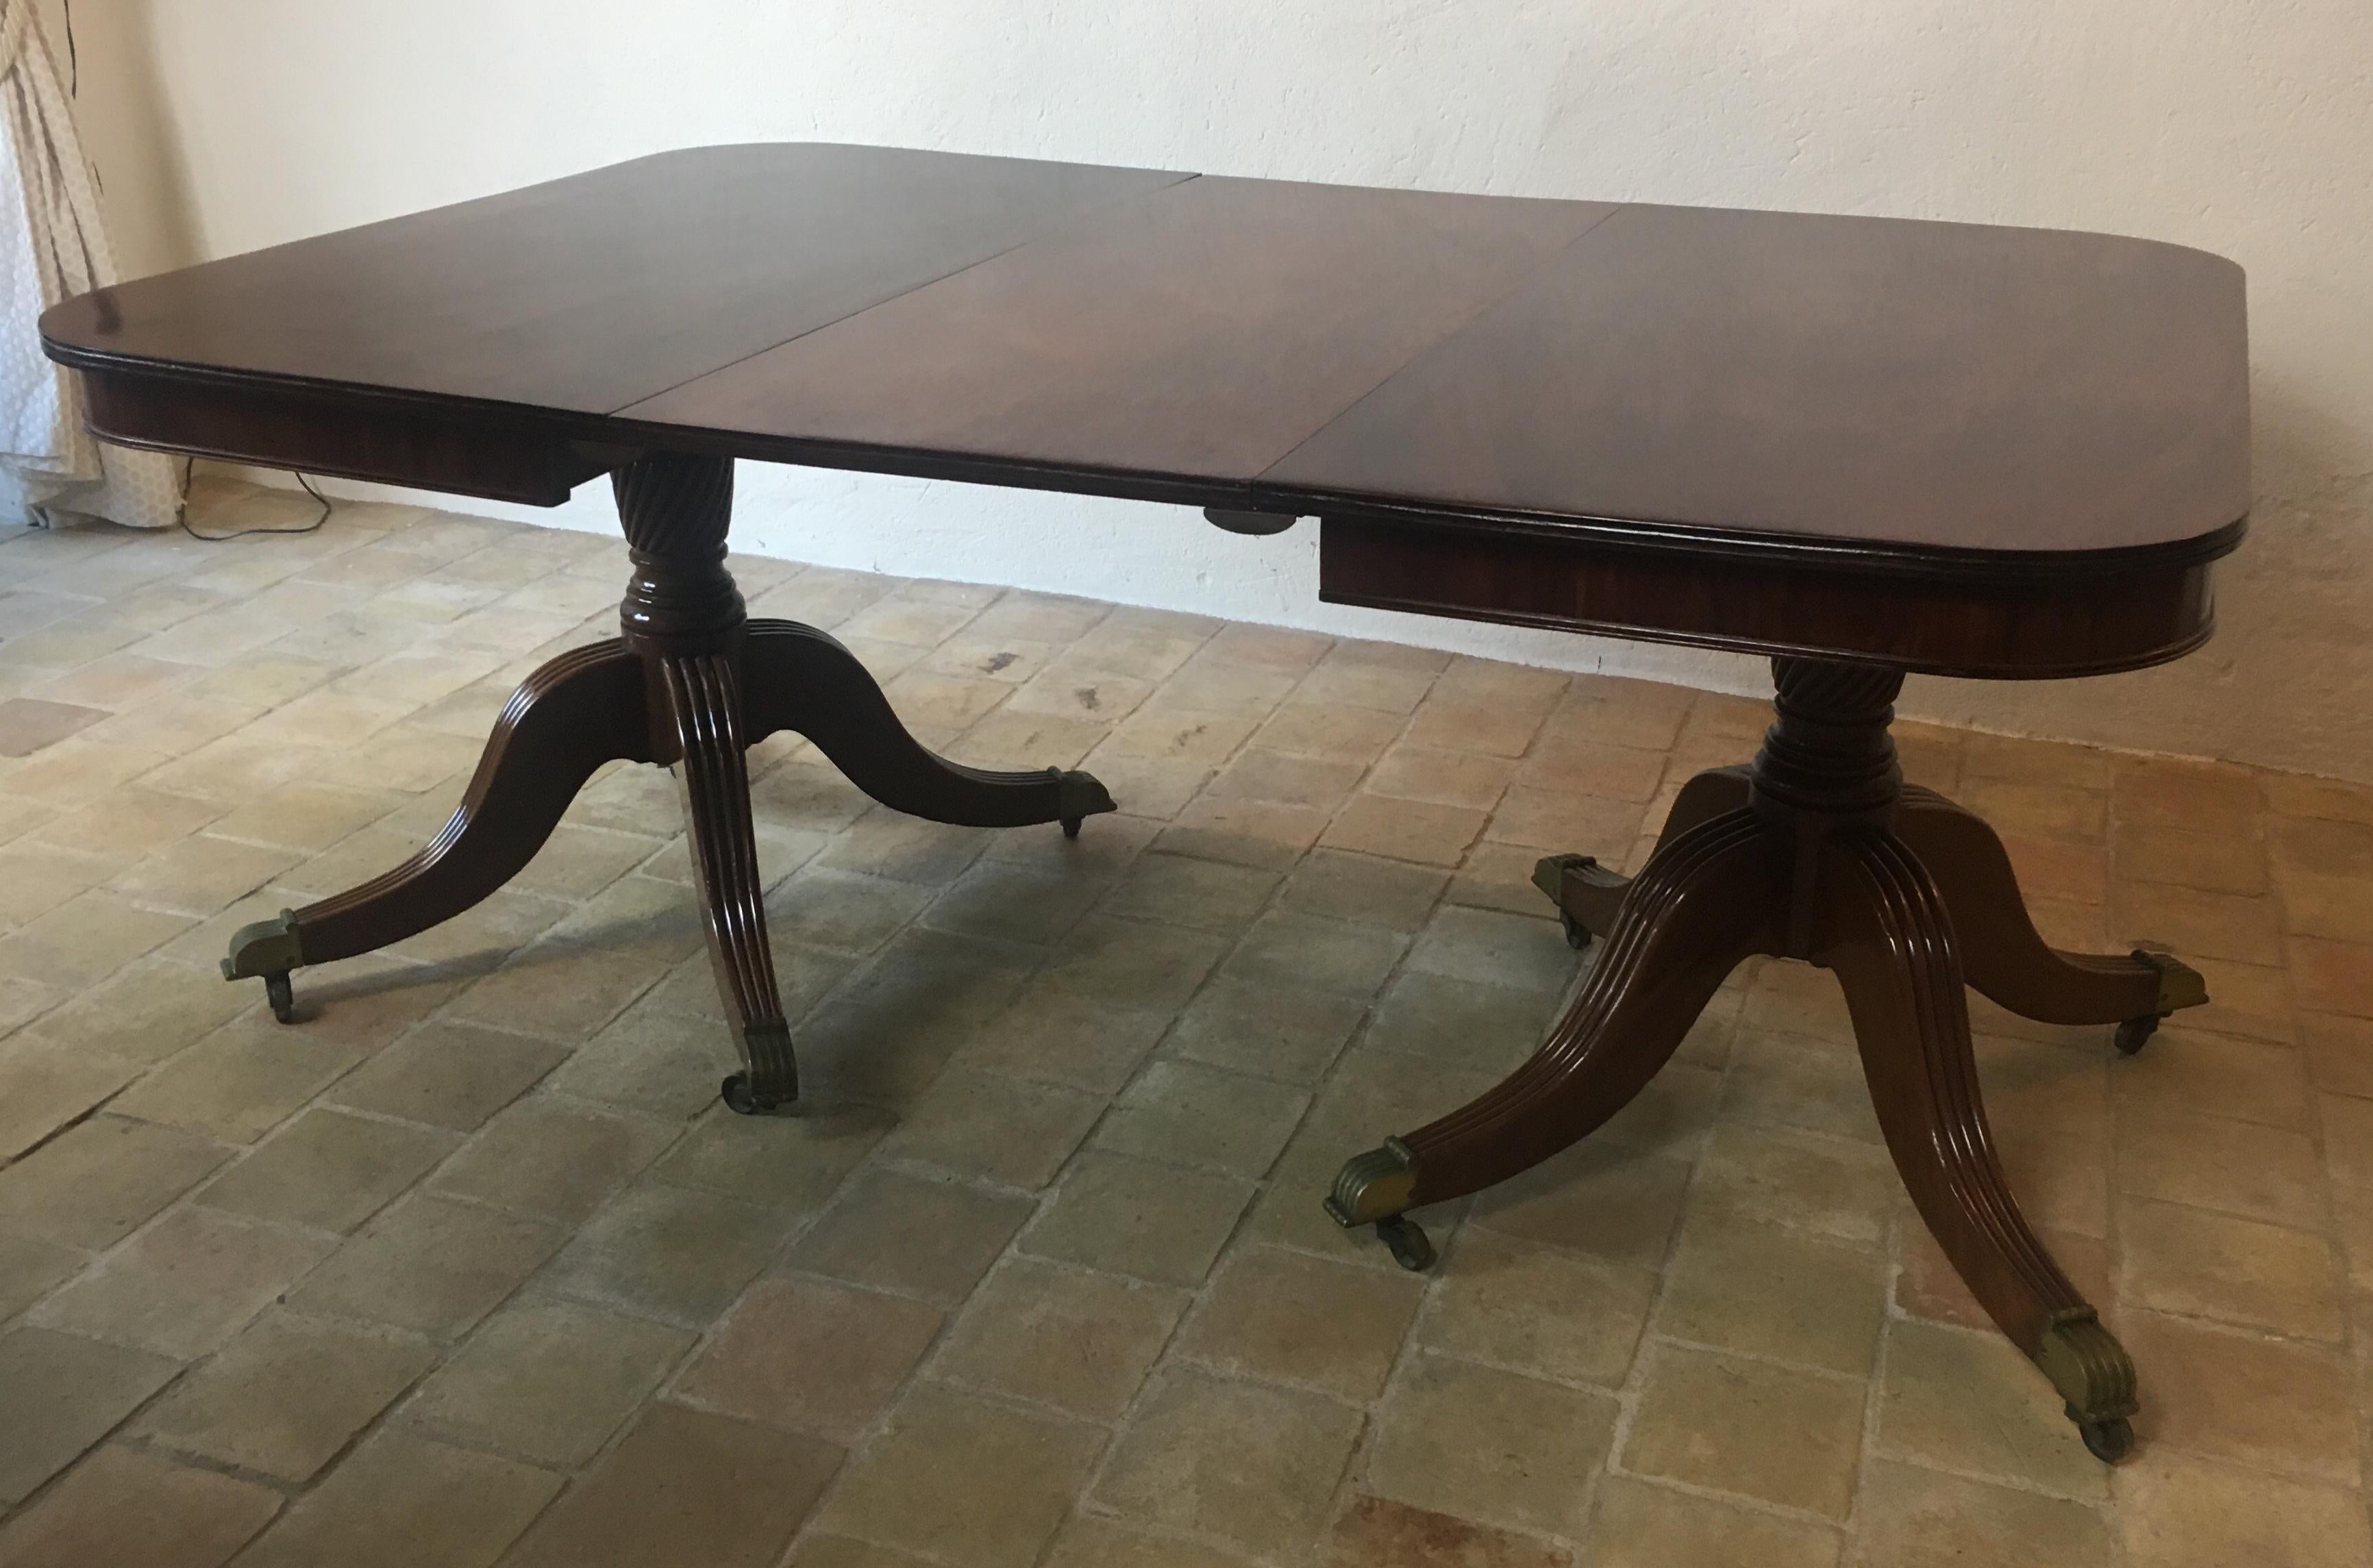 A superb quality English Regency dining table made of solid Cuban flame mahogany supported by two turned pillars/pedestals above four swept legs, terminating on brass casters.

The remarkable flame mahogany wood has a beautiful grain and color and